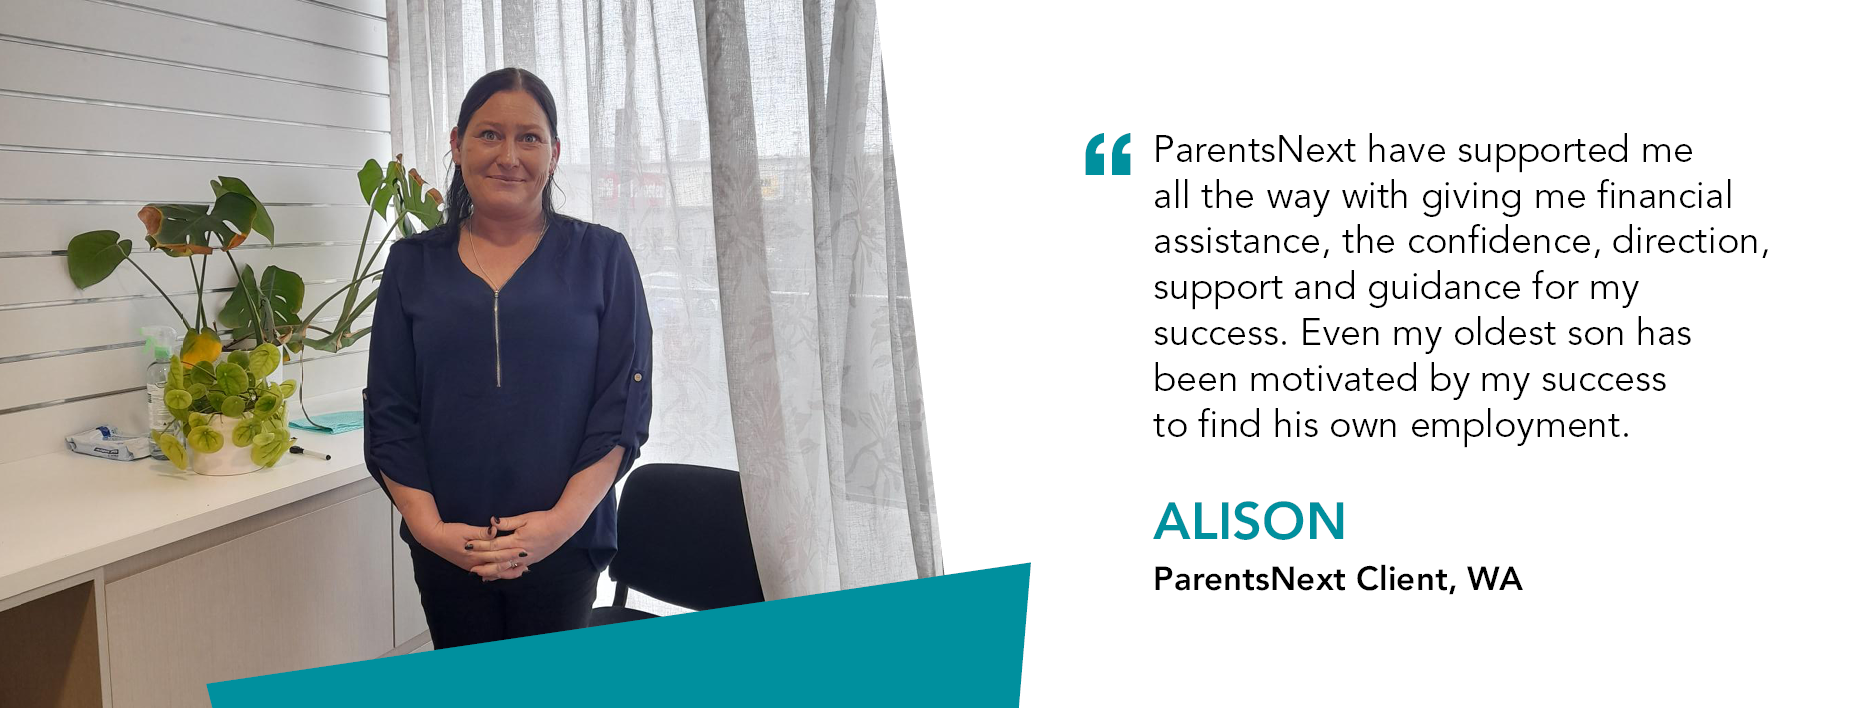 Quote reads "ParentsNext have supported me all the way with giving me financial assistance, the confidence, direction, support and guidance for my success. Even my oldest son has been motivated by my success to find his own employment." Alison ParentsNext Client